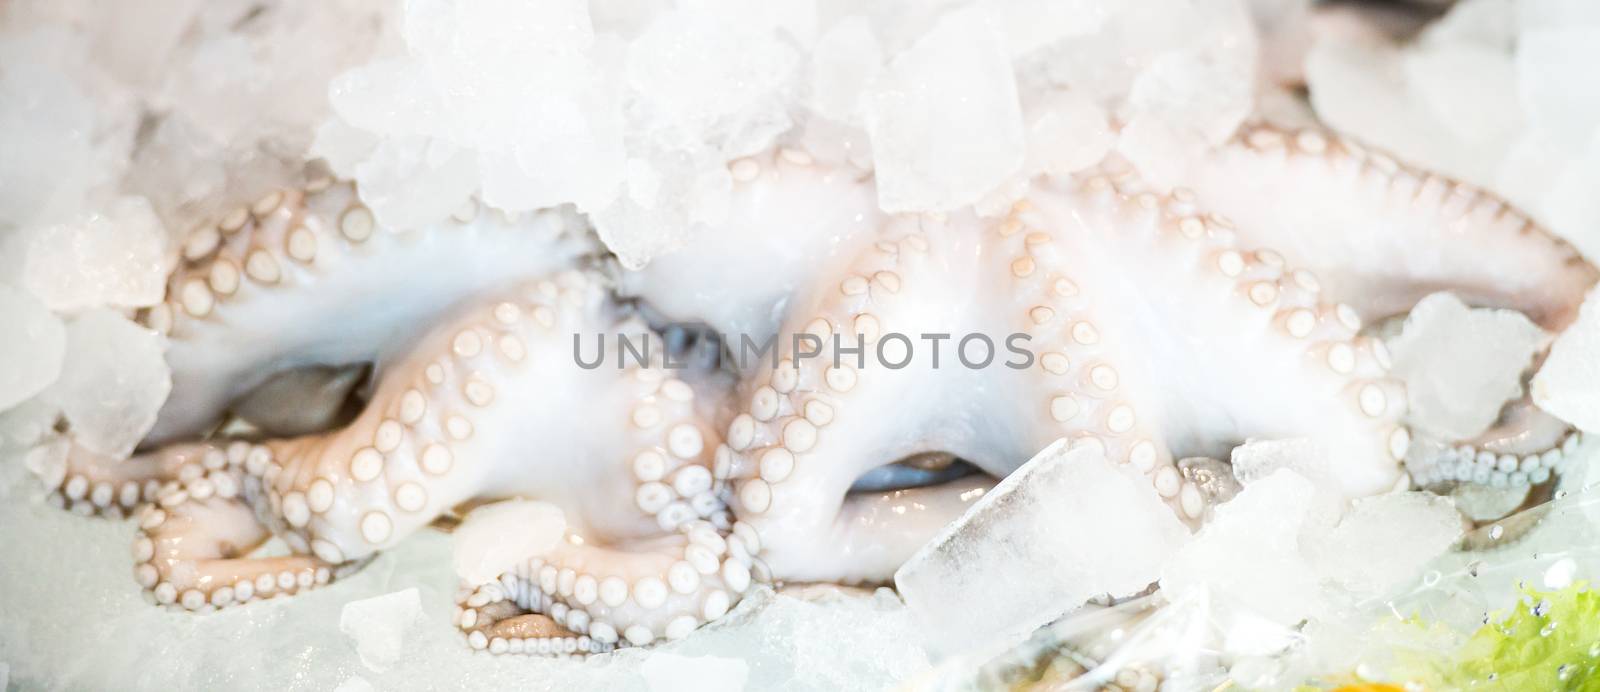 Complete raw and fresh octopus on ice